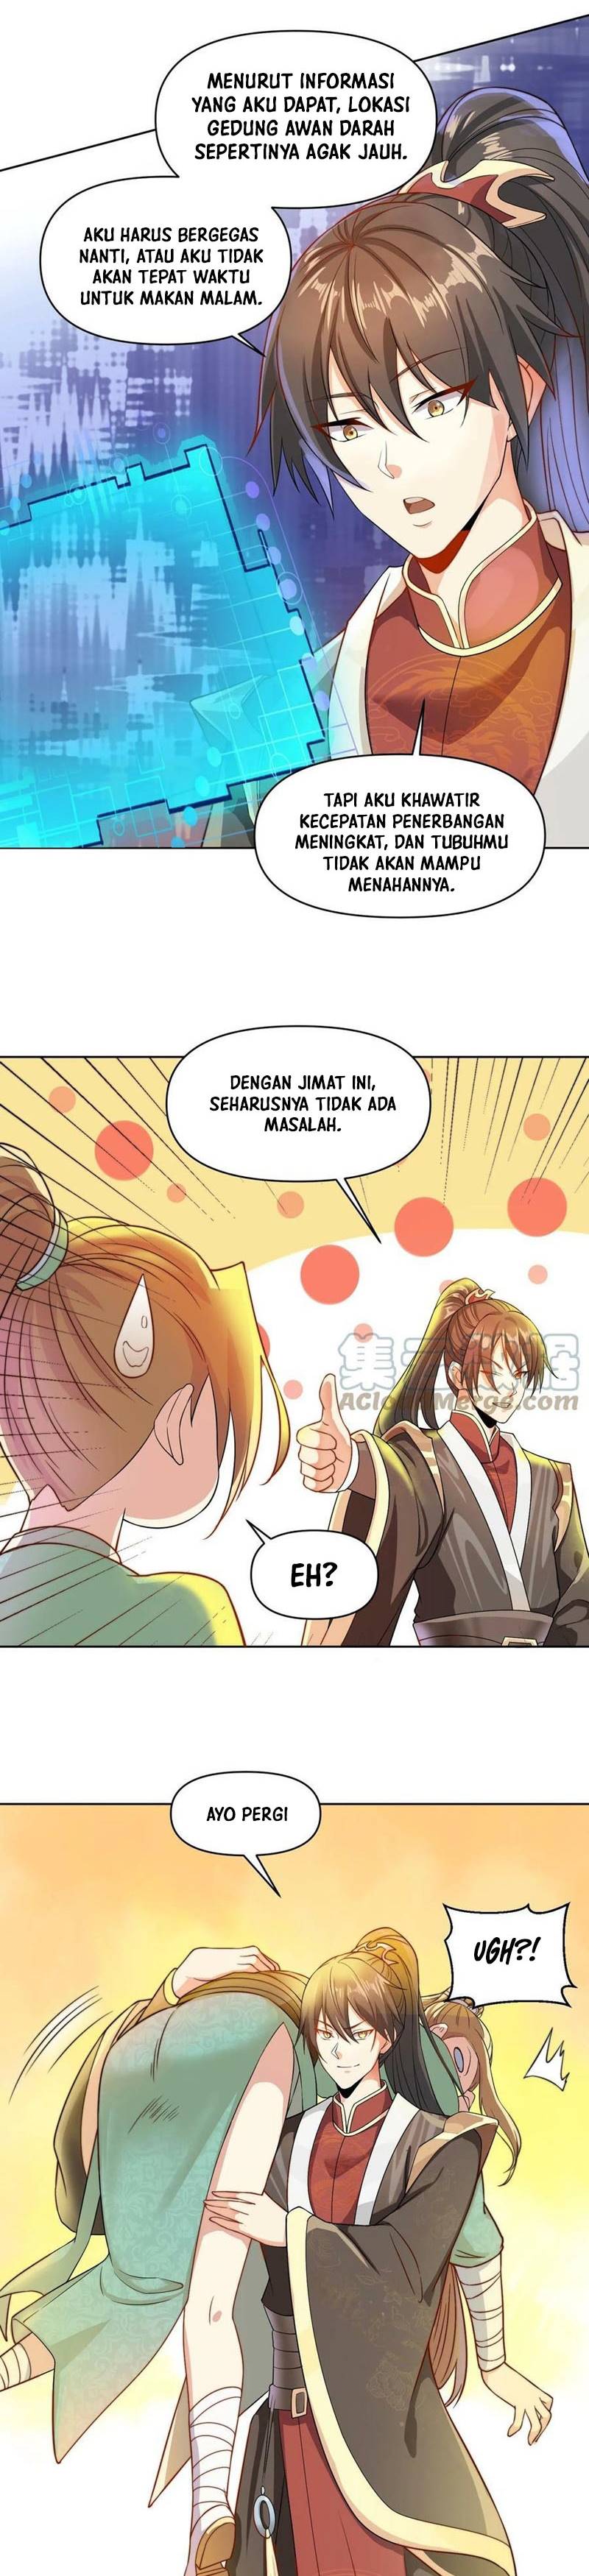 It’s Over! The Queen’s Soft Rice Husband is Actually Invincible Chapter 11 Bahasa Indonesia